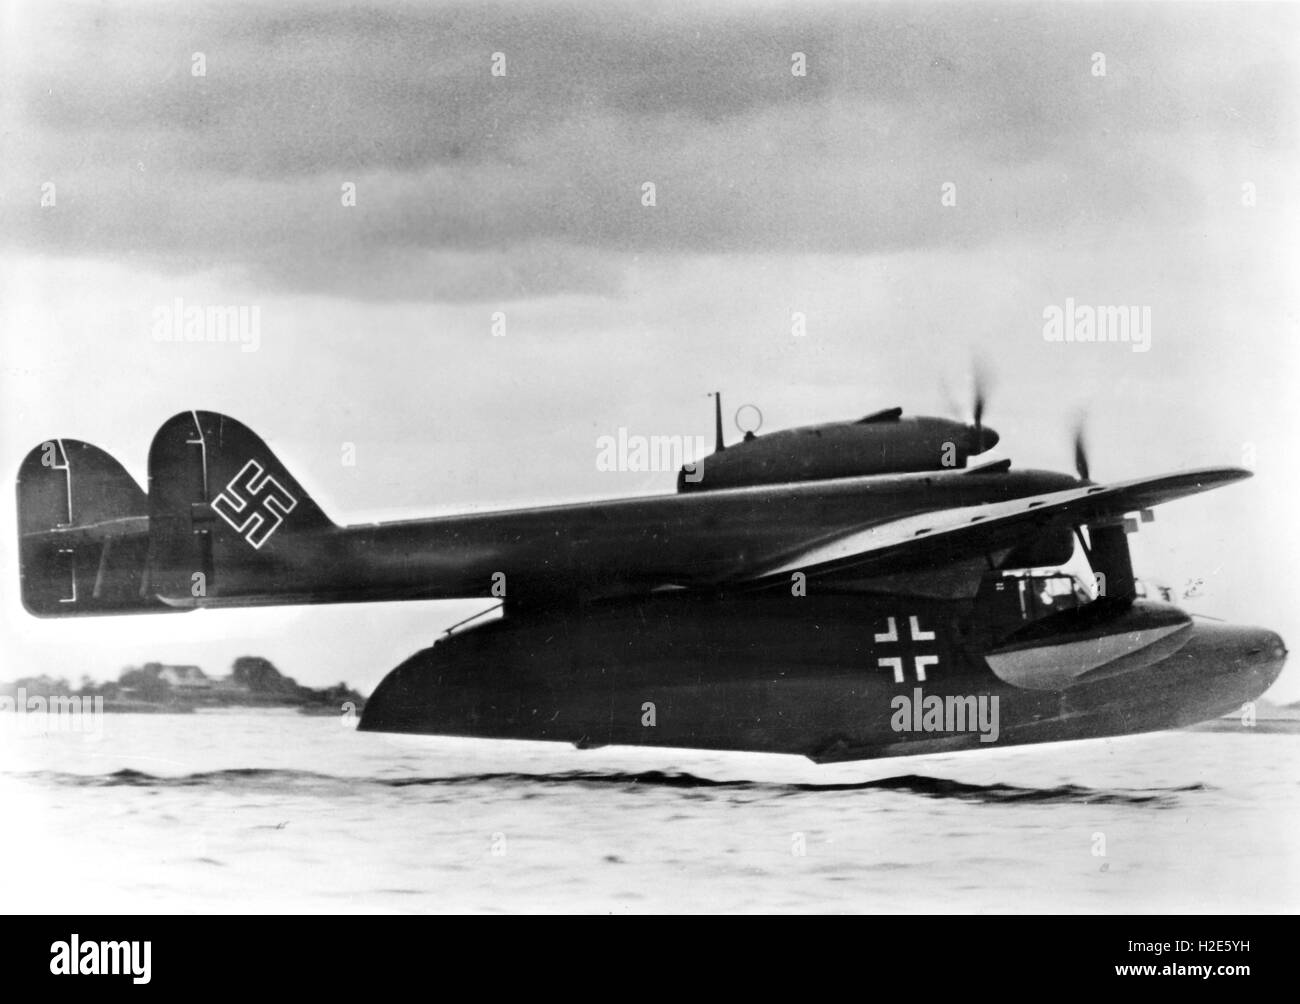 The Nazi propaganda image depicts an aircraft, type Blohm & Voss BV 138 of the German Wehrmacht flying over water. The photo was published in July 1942. Fotoarchiv für Zeitgeschichte - NO WIRE SERVICE -  | usage worldwide Stock Photo